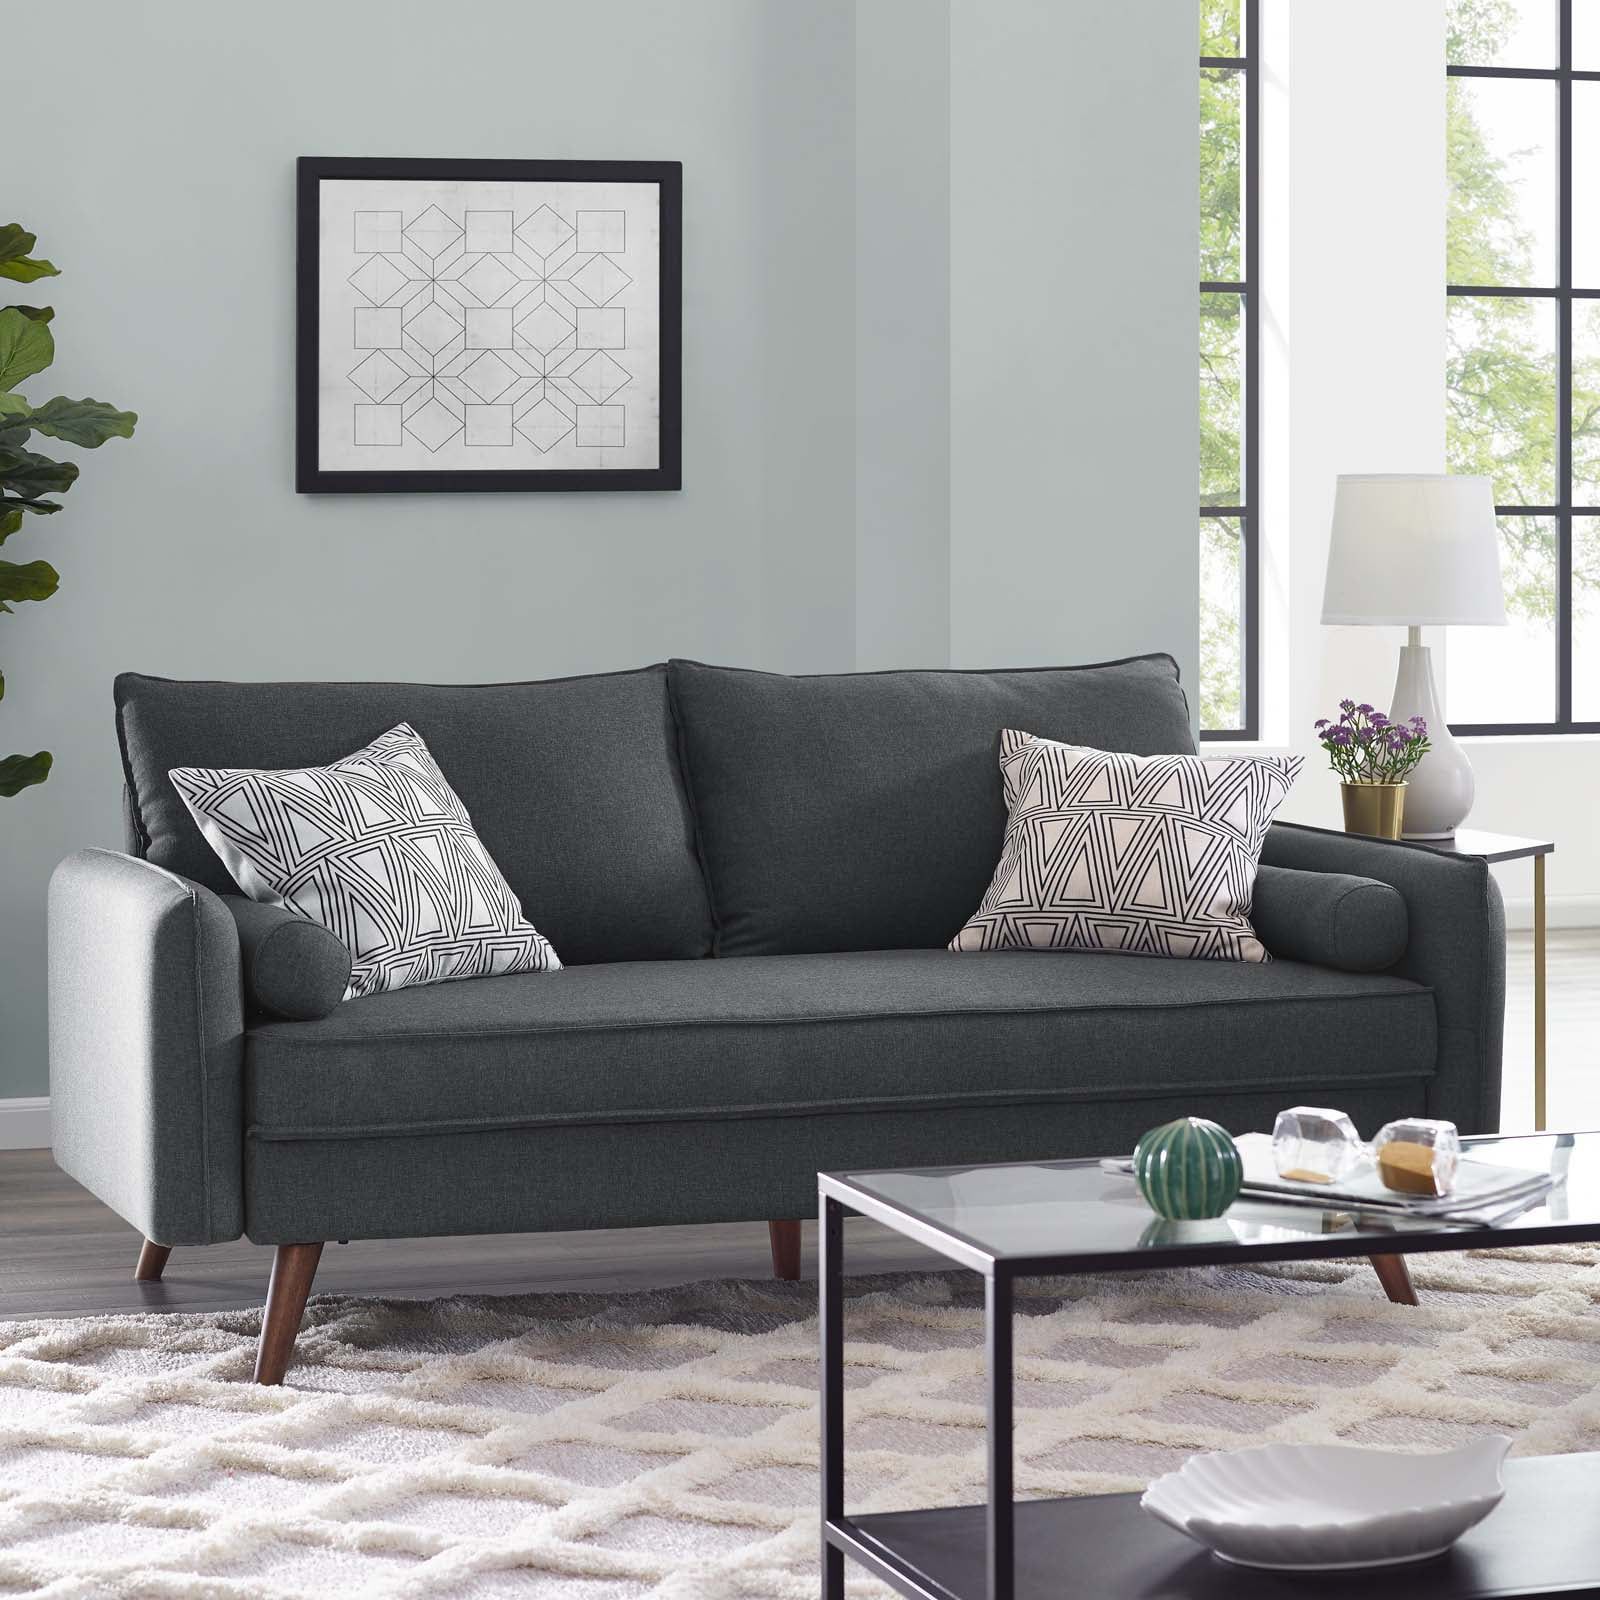 Modway Revive Fabric Upholstered Sofa, Multiple Colors – Walmart With Regard To Sofas In Multiple Colors (View 9 of 20)